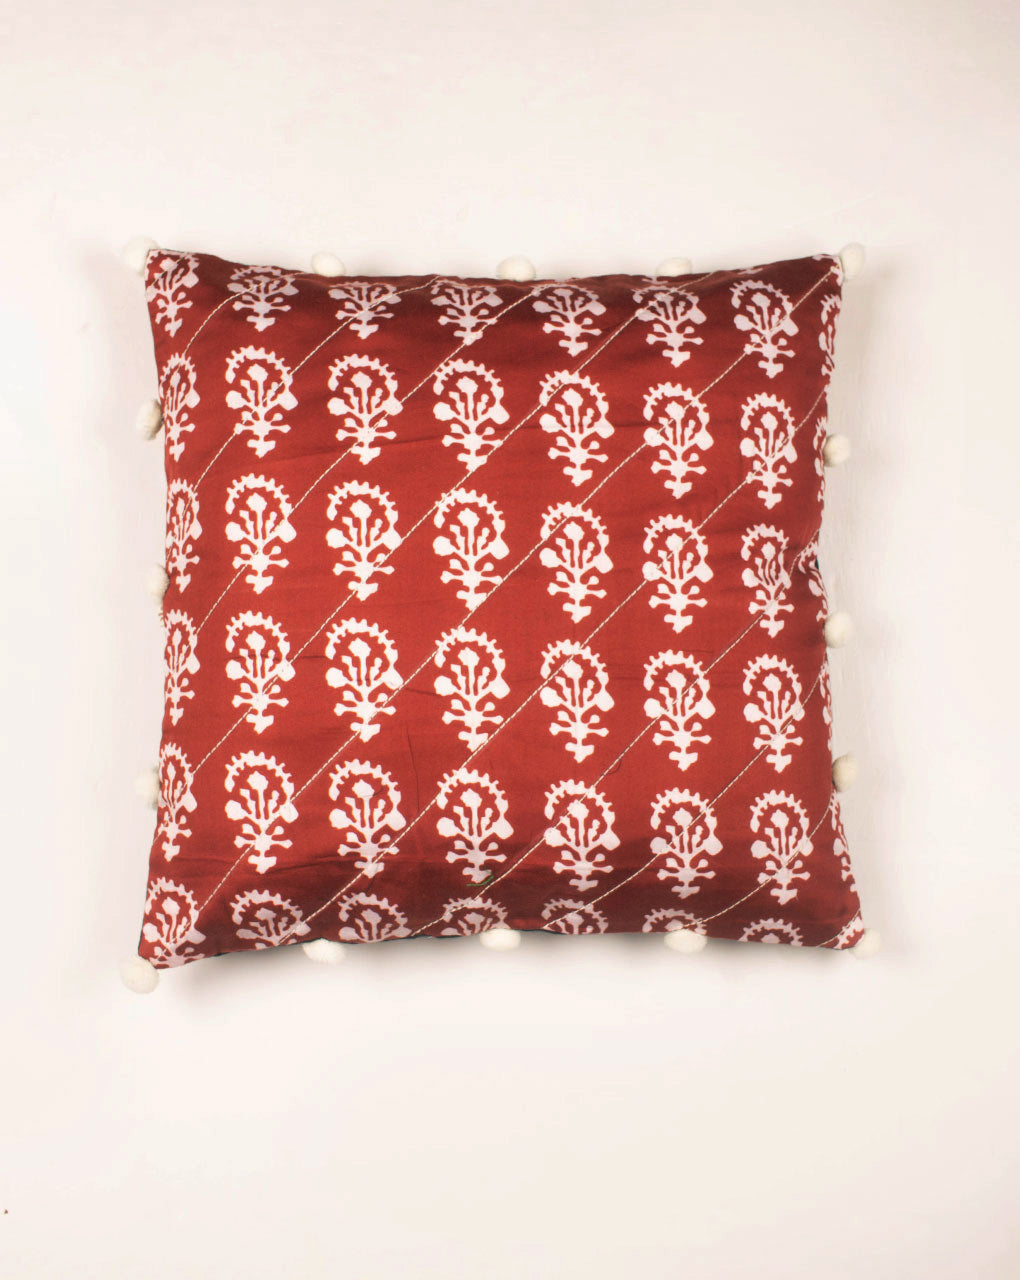 Hand Crafted Glazed Cotton Cushion Cover ( 16X16 Inches ) - Fabriclore.com